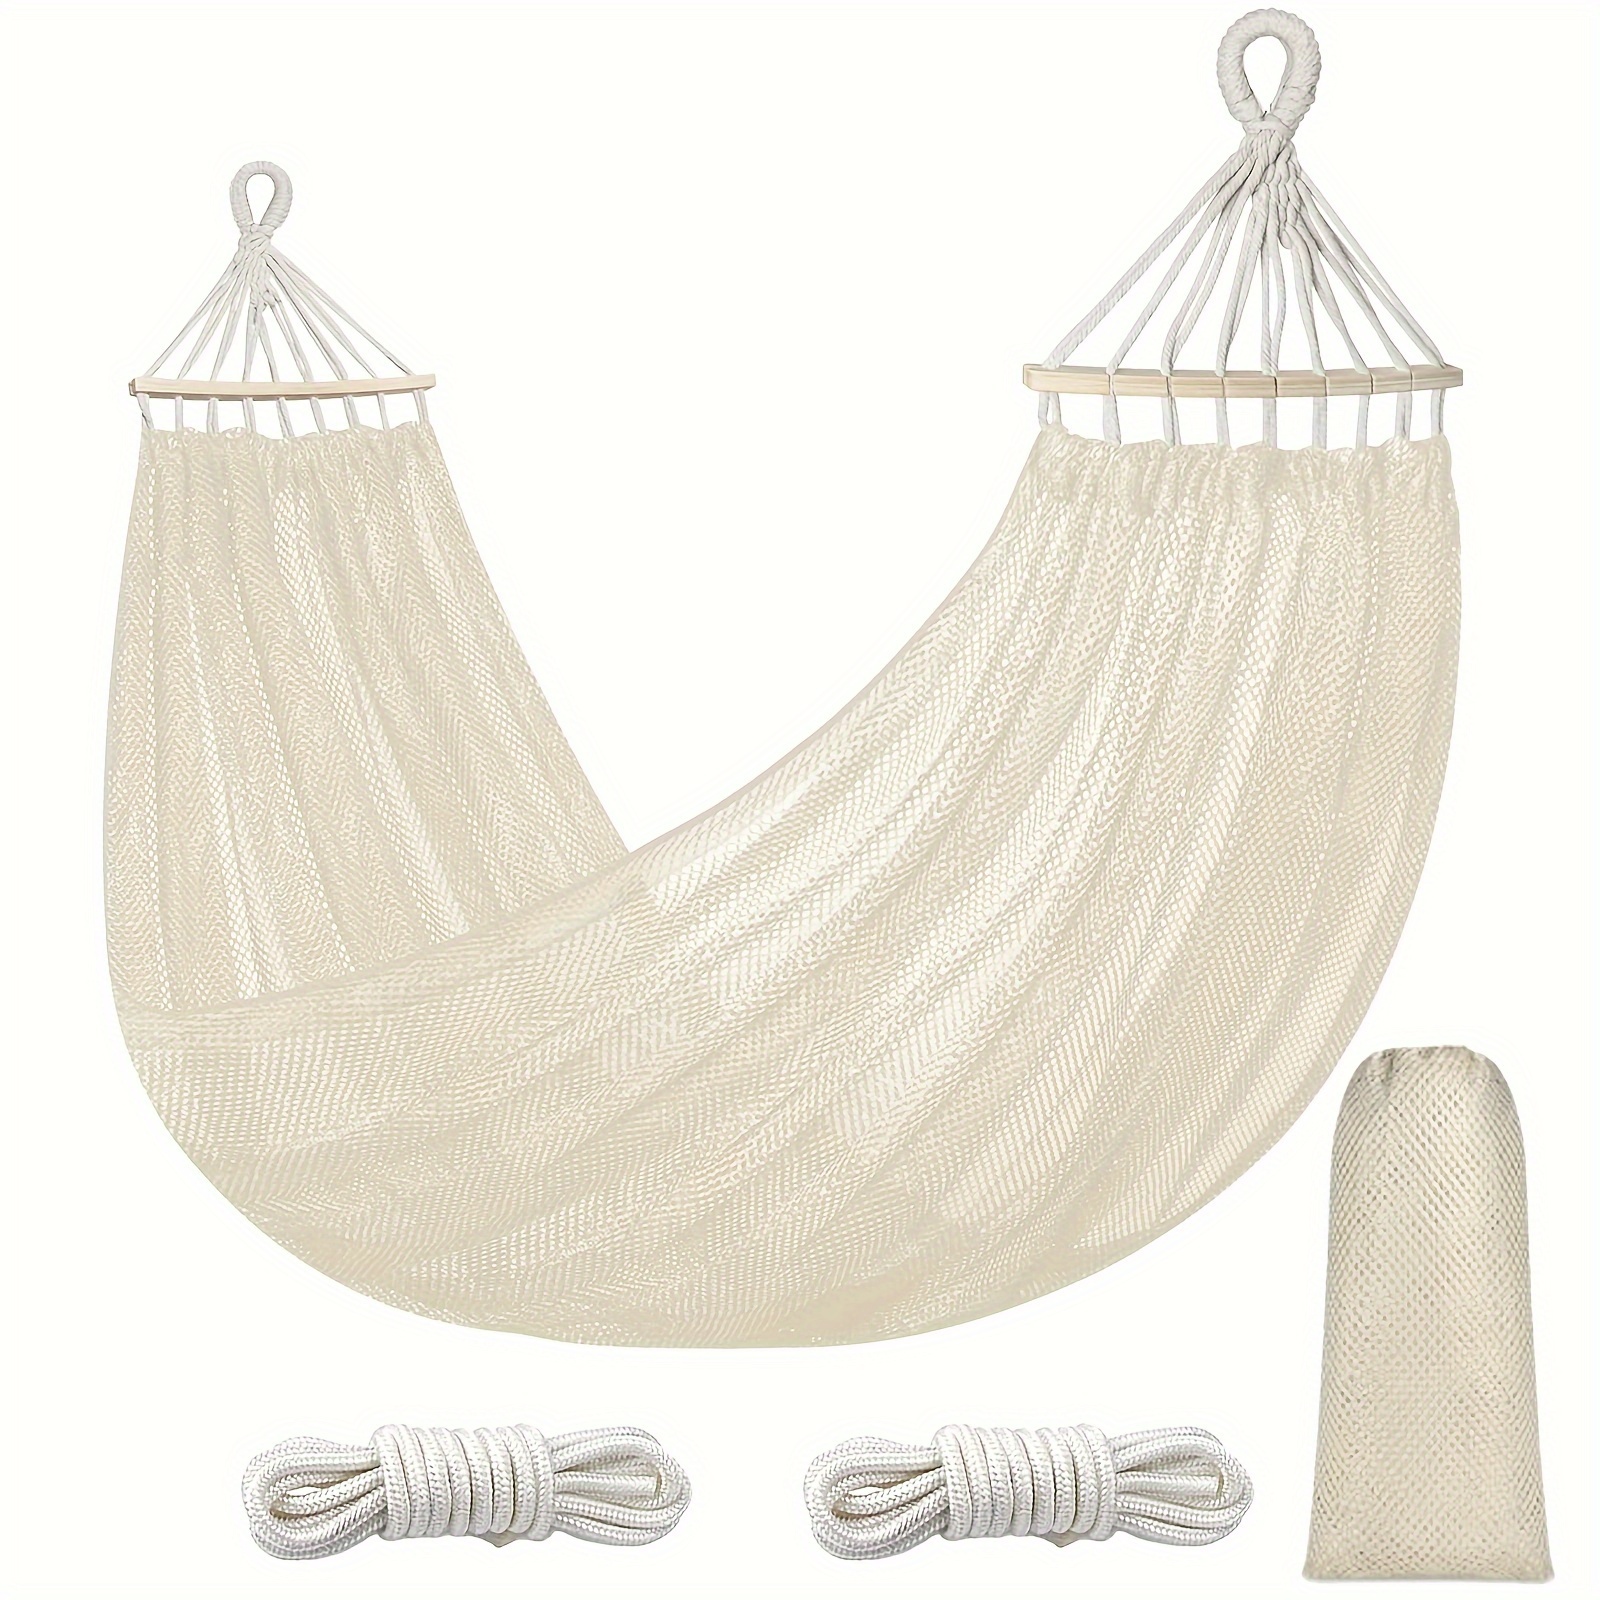 

1pc, White Ice Silk Hammock, For Outdoor Patio & Garden Use, Comfortable And Breathable Fabric With Sturdy Ropes & Balance Beam, Home Camping Beach Relaxation Equipment